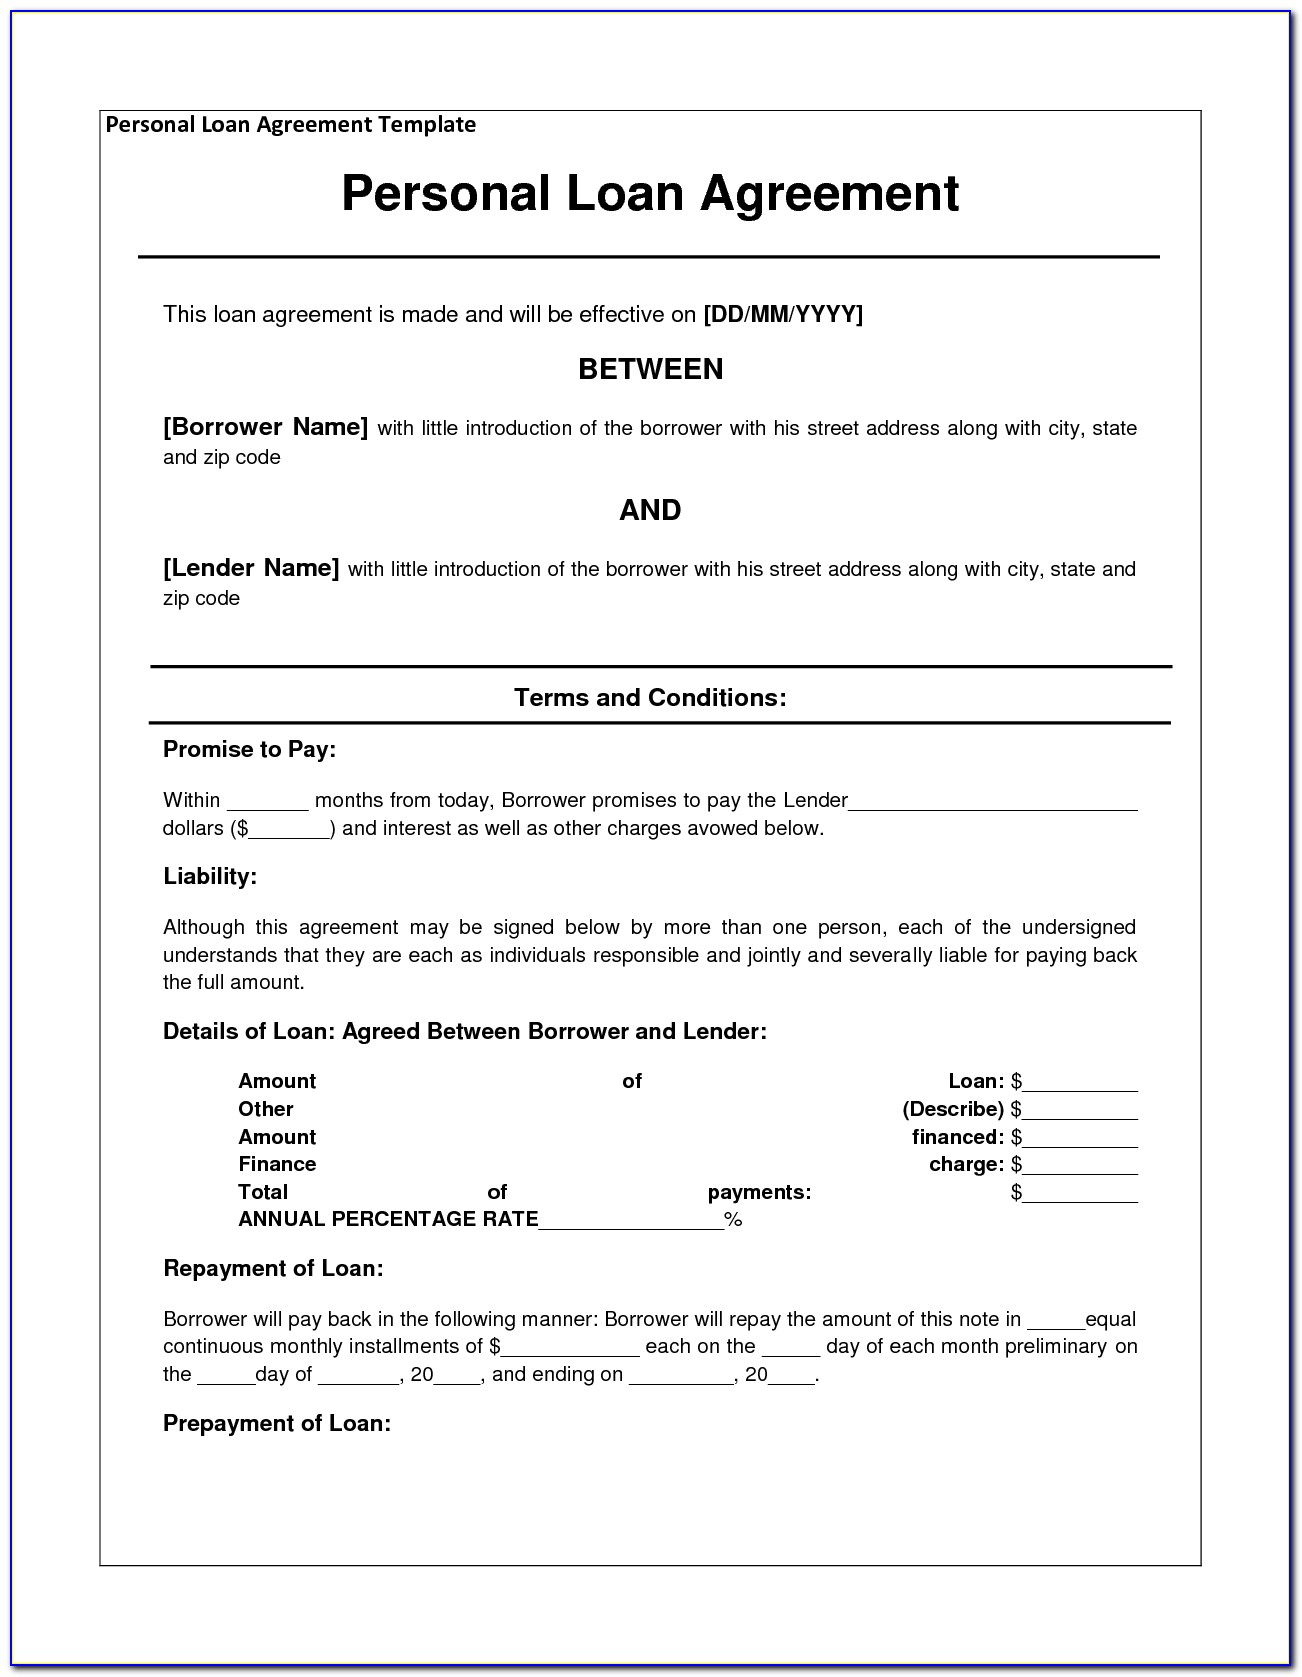 Personal Loan Form Free